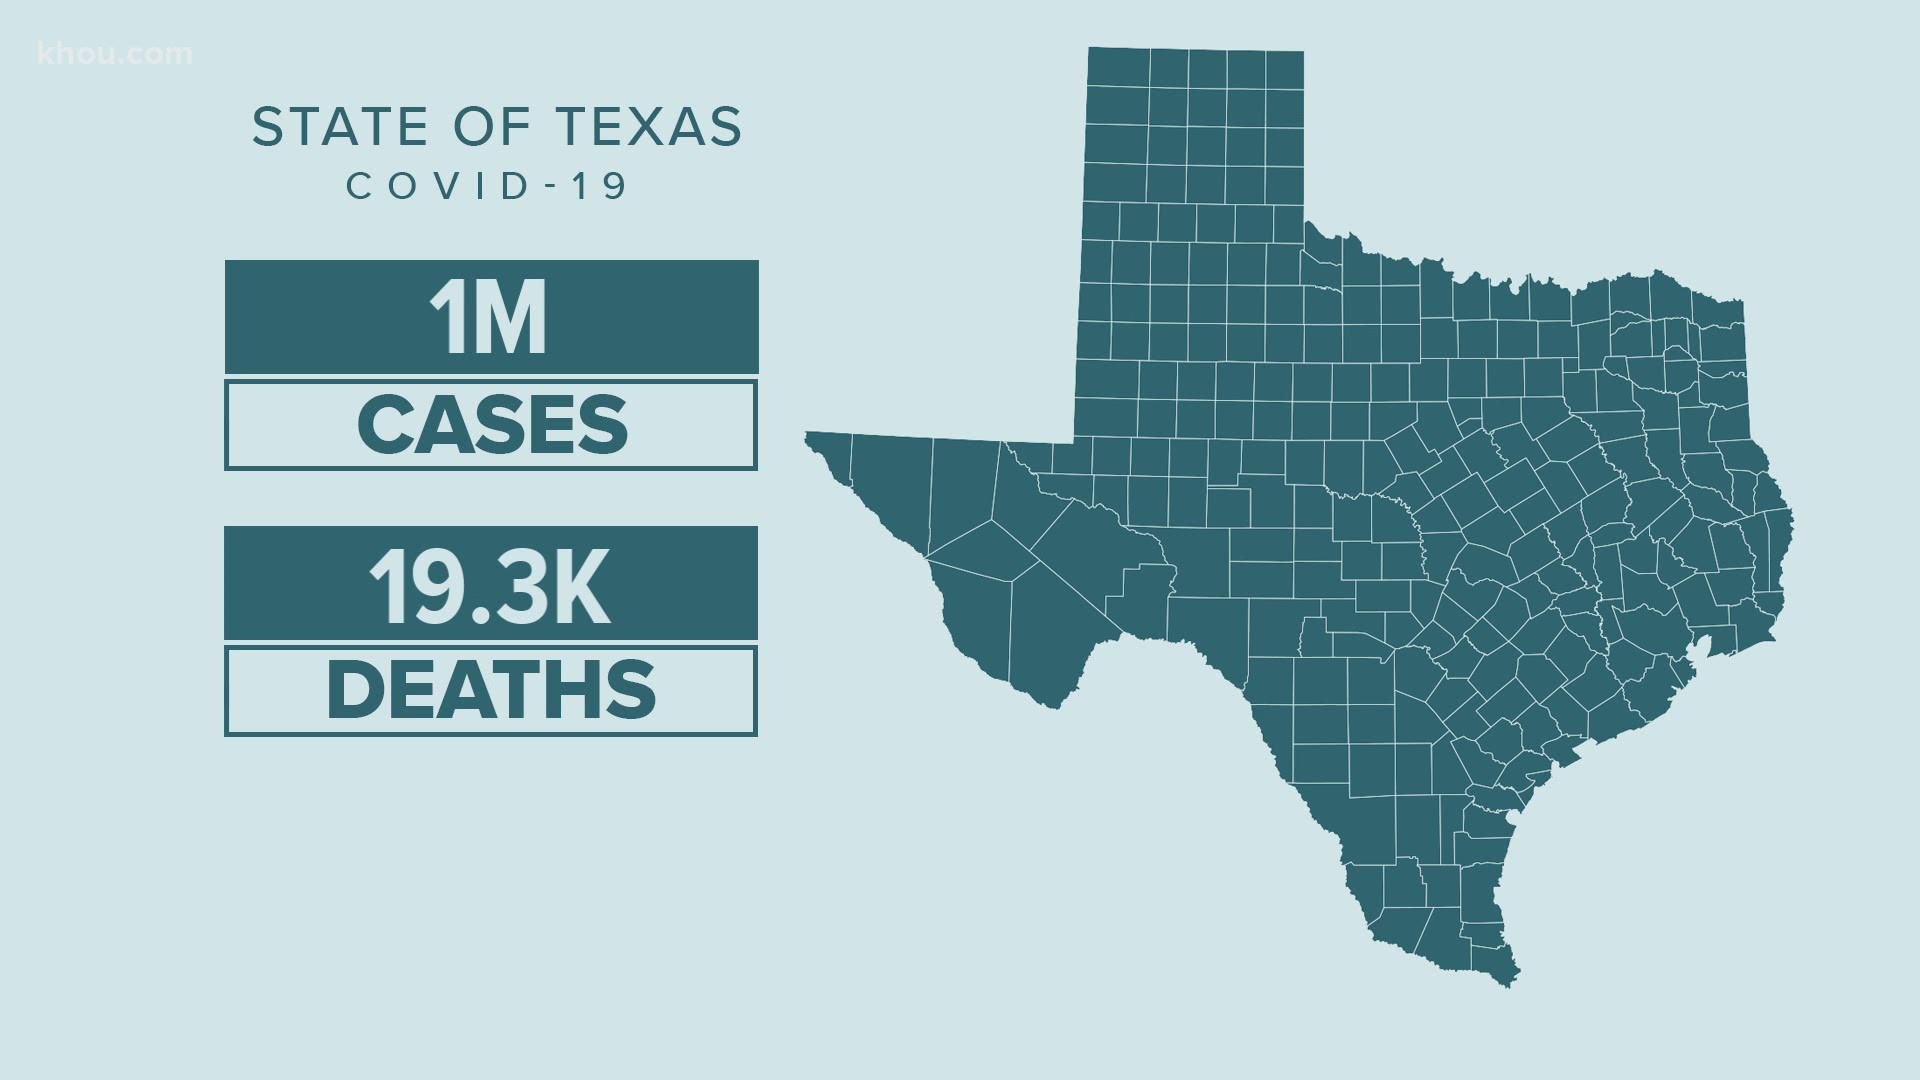 It took Texas eight months to reach 1 million COVID-19 cases, and now experts worry the case count will escalate even faster.